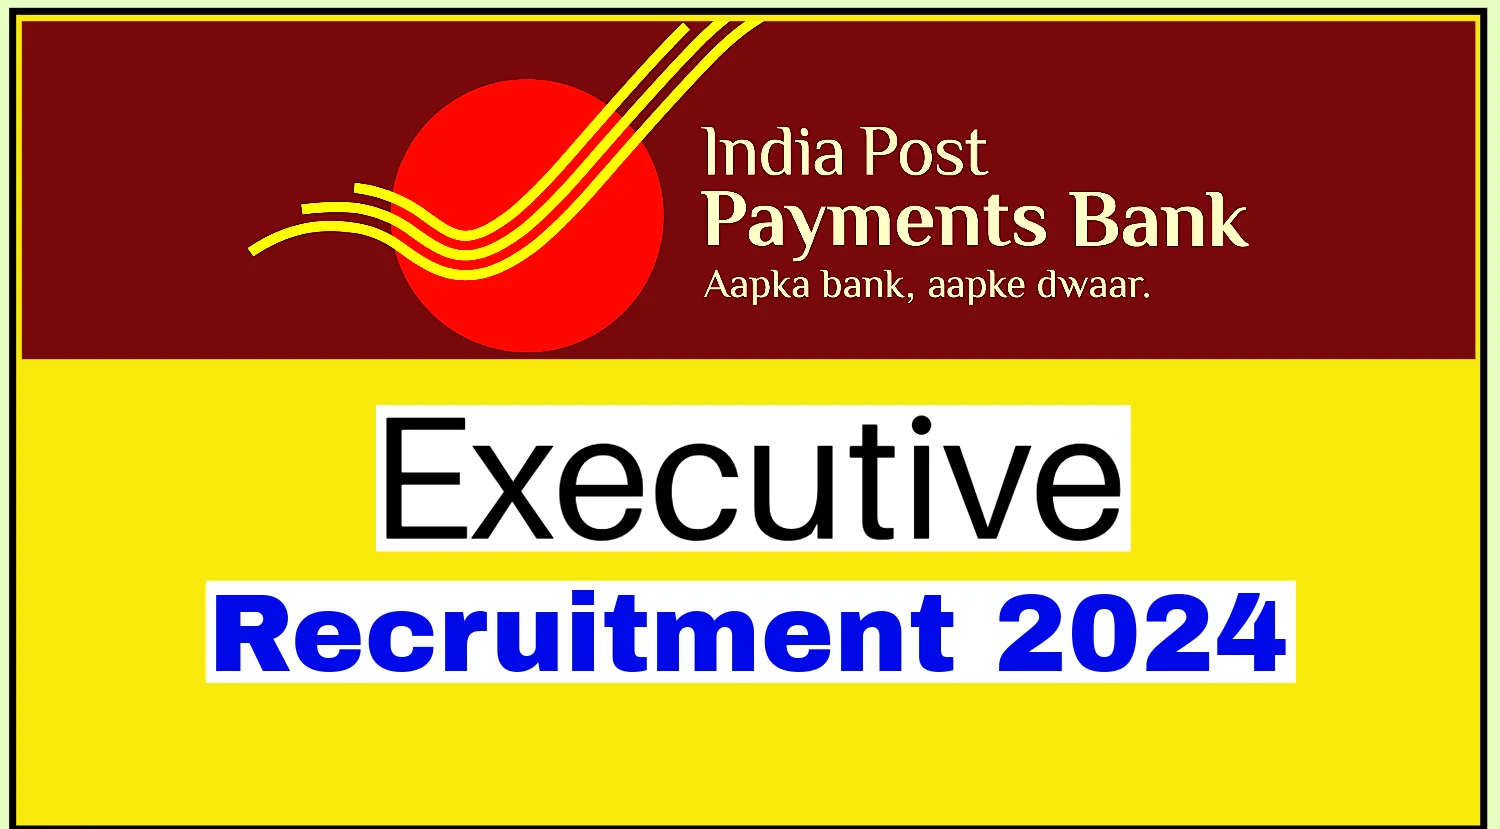 IPPB Executive Recruitment 2024 Notification Out, Apply Now